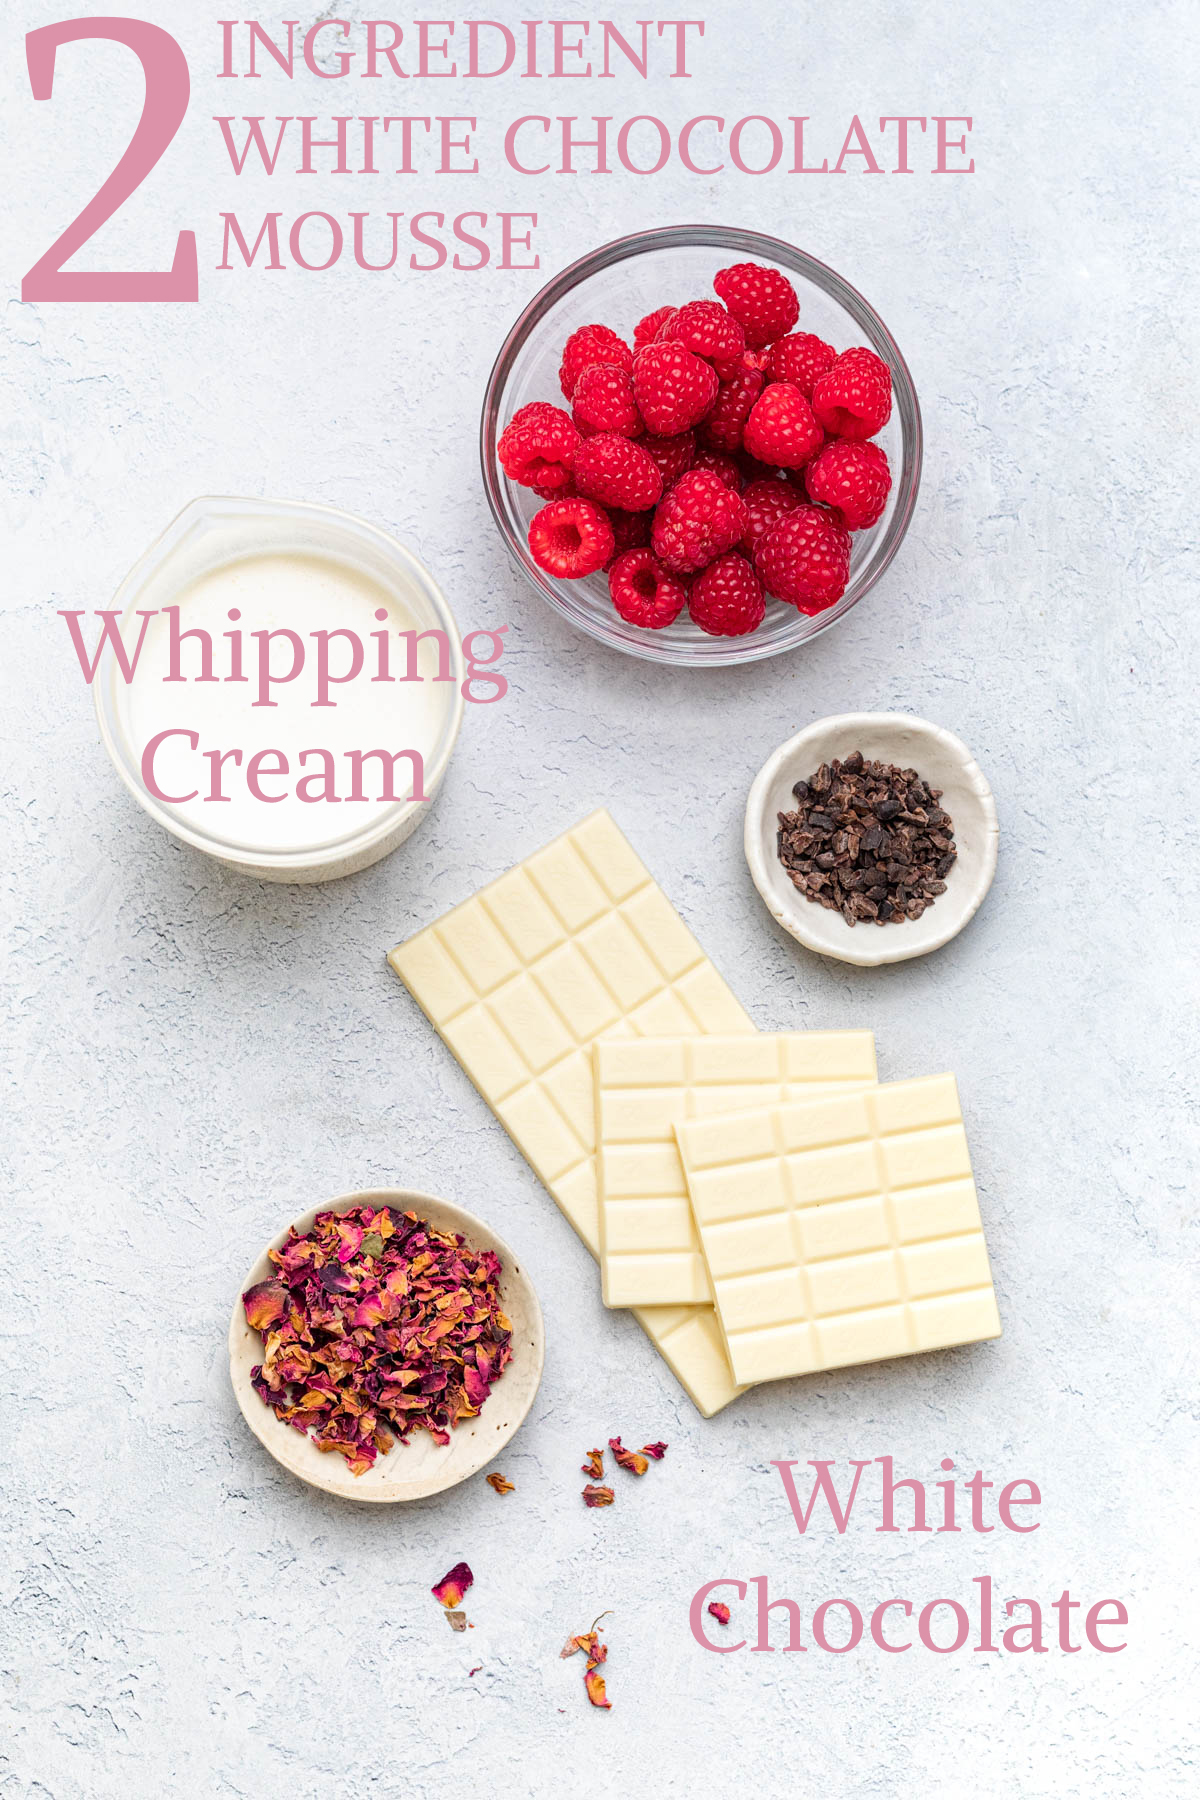 Ingredients to make white chocolate mousse.